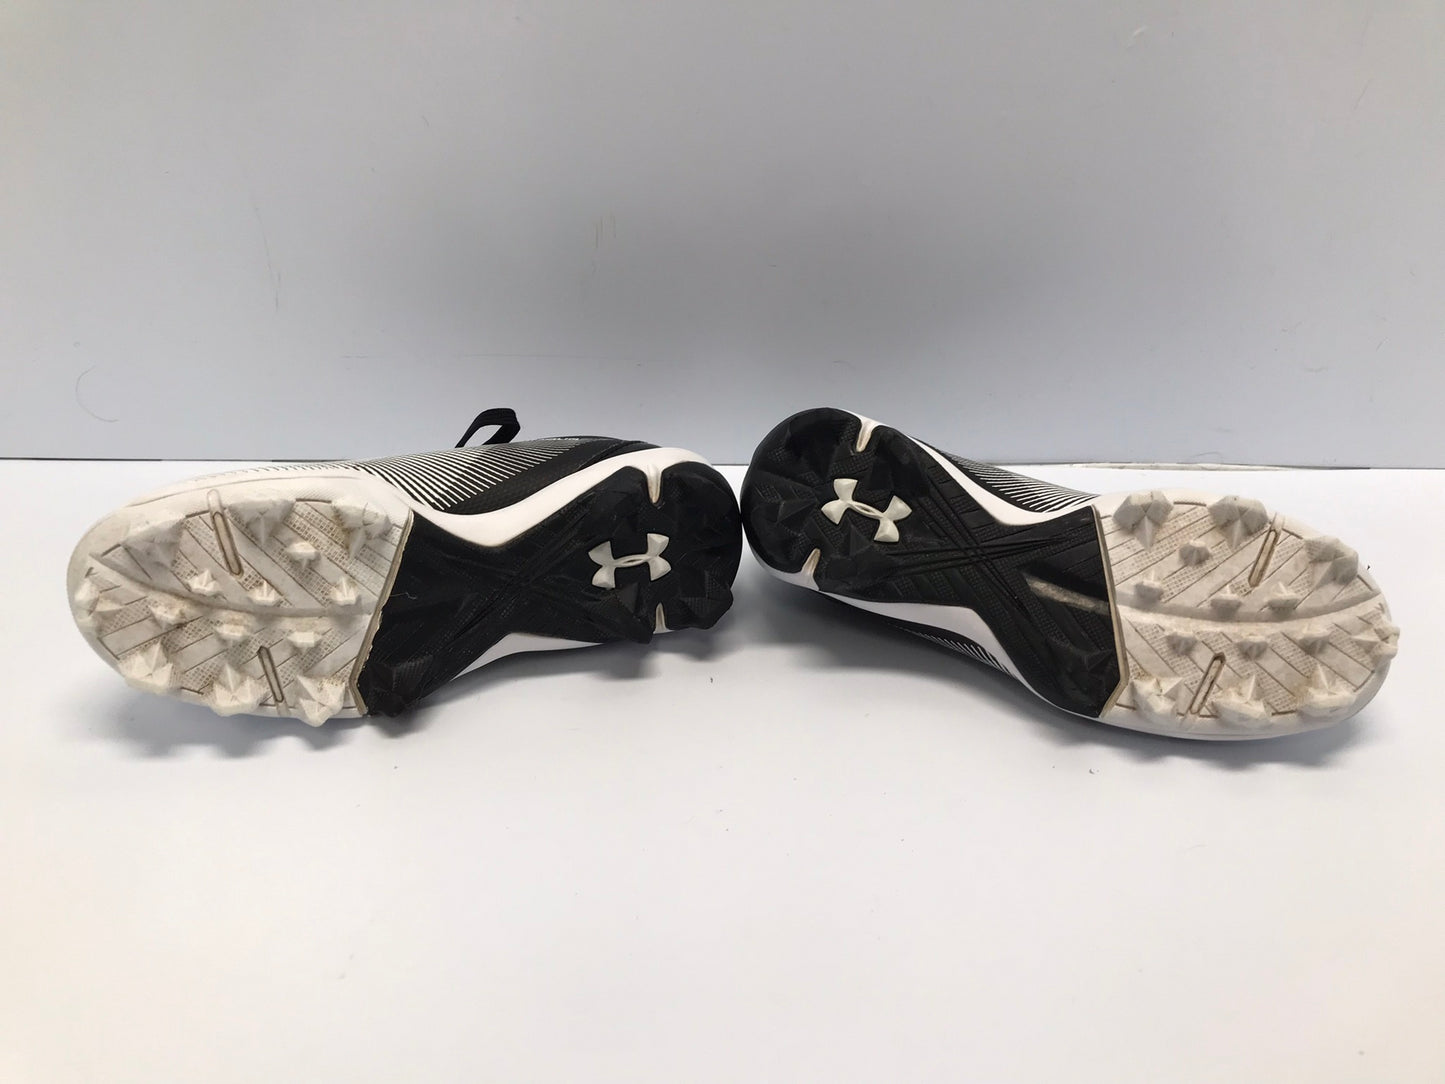 Baseball Shoes Cleats Child Size 12 Under Armour Black White Excellent